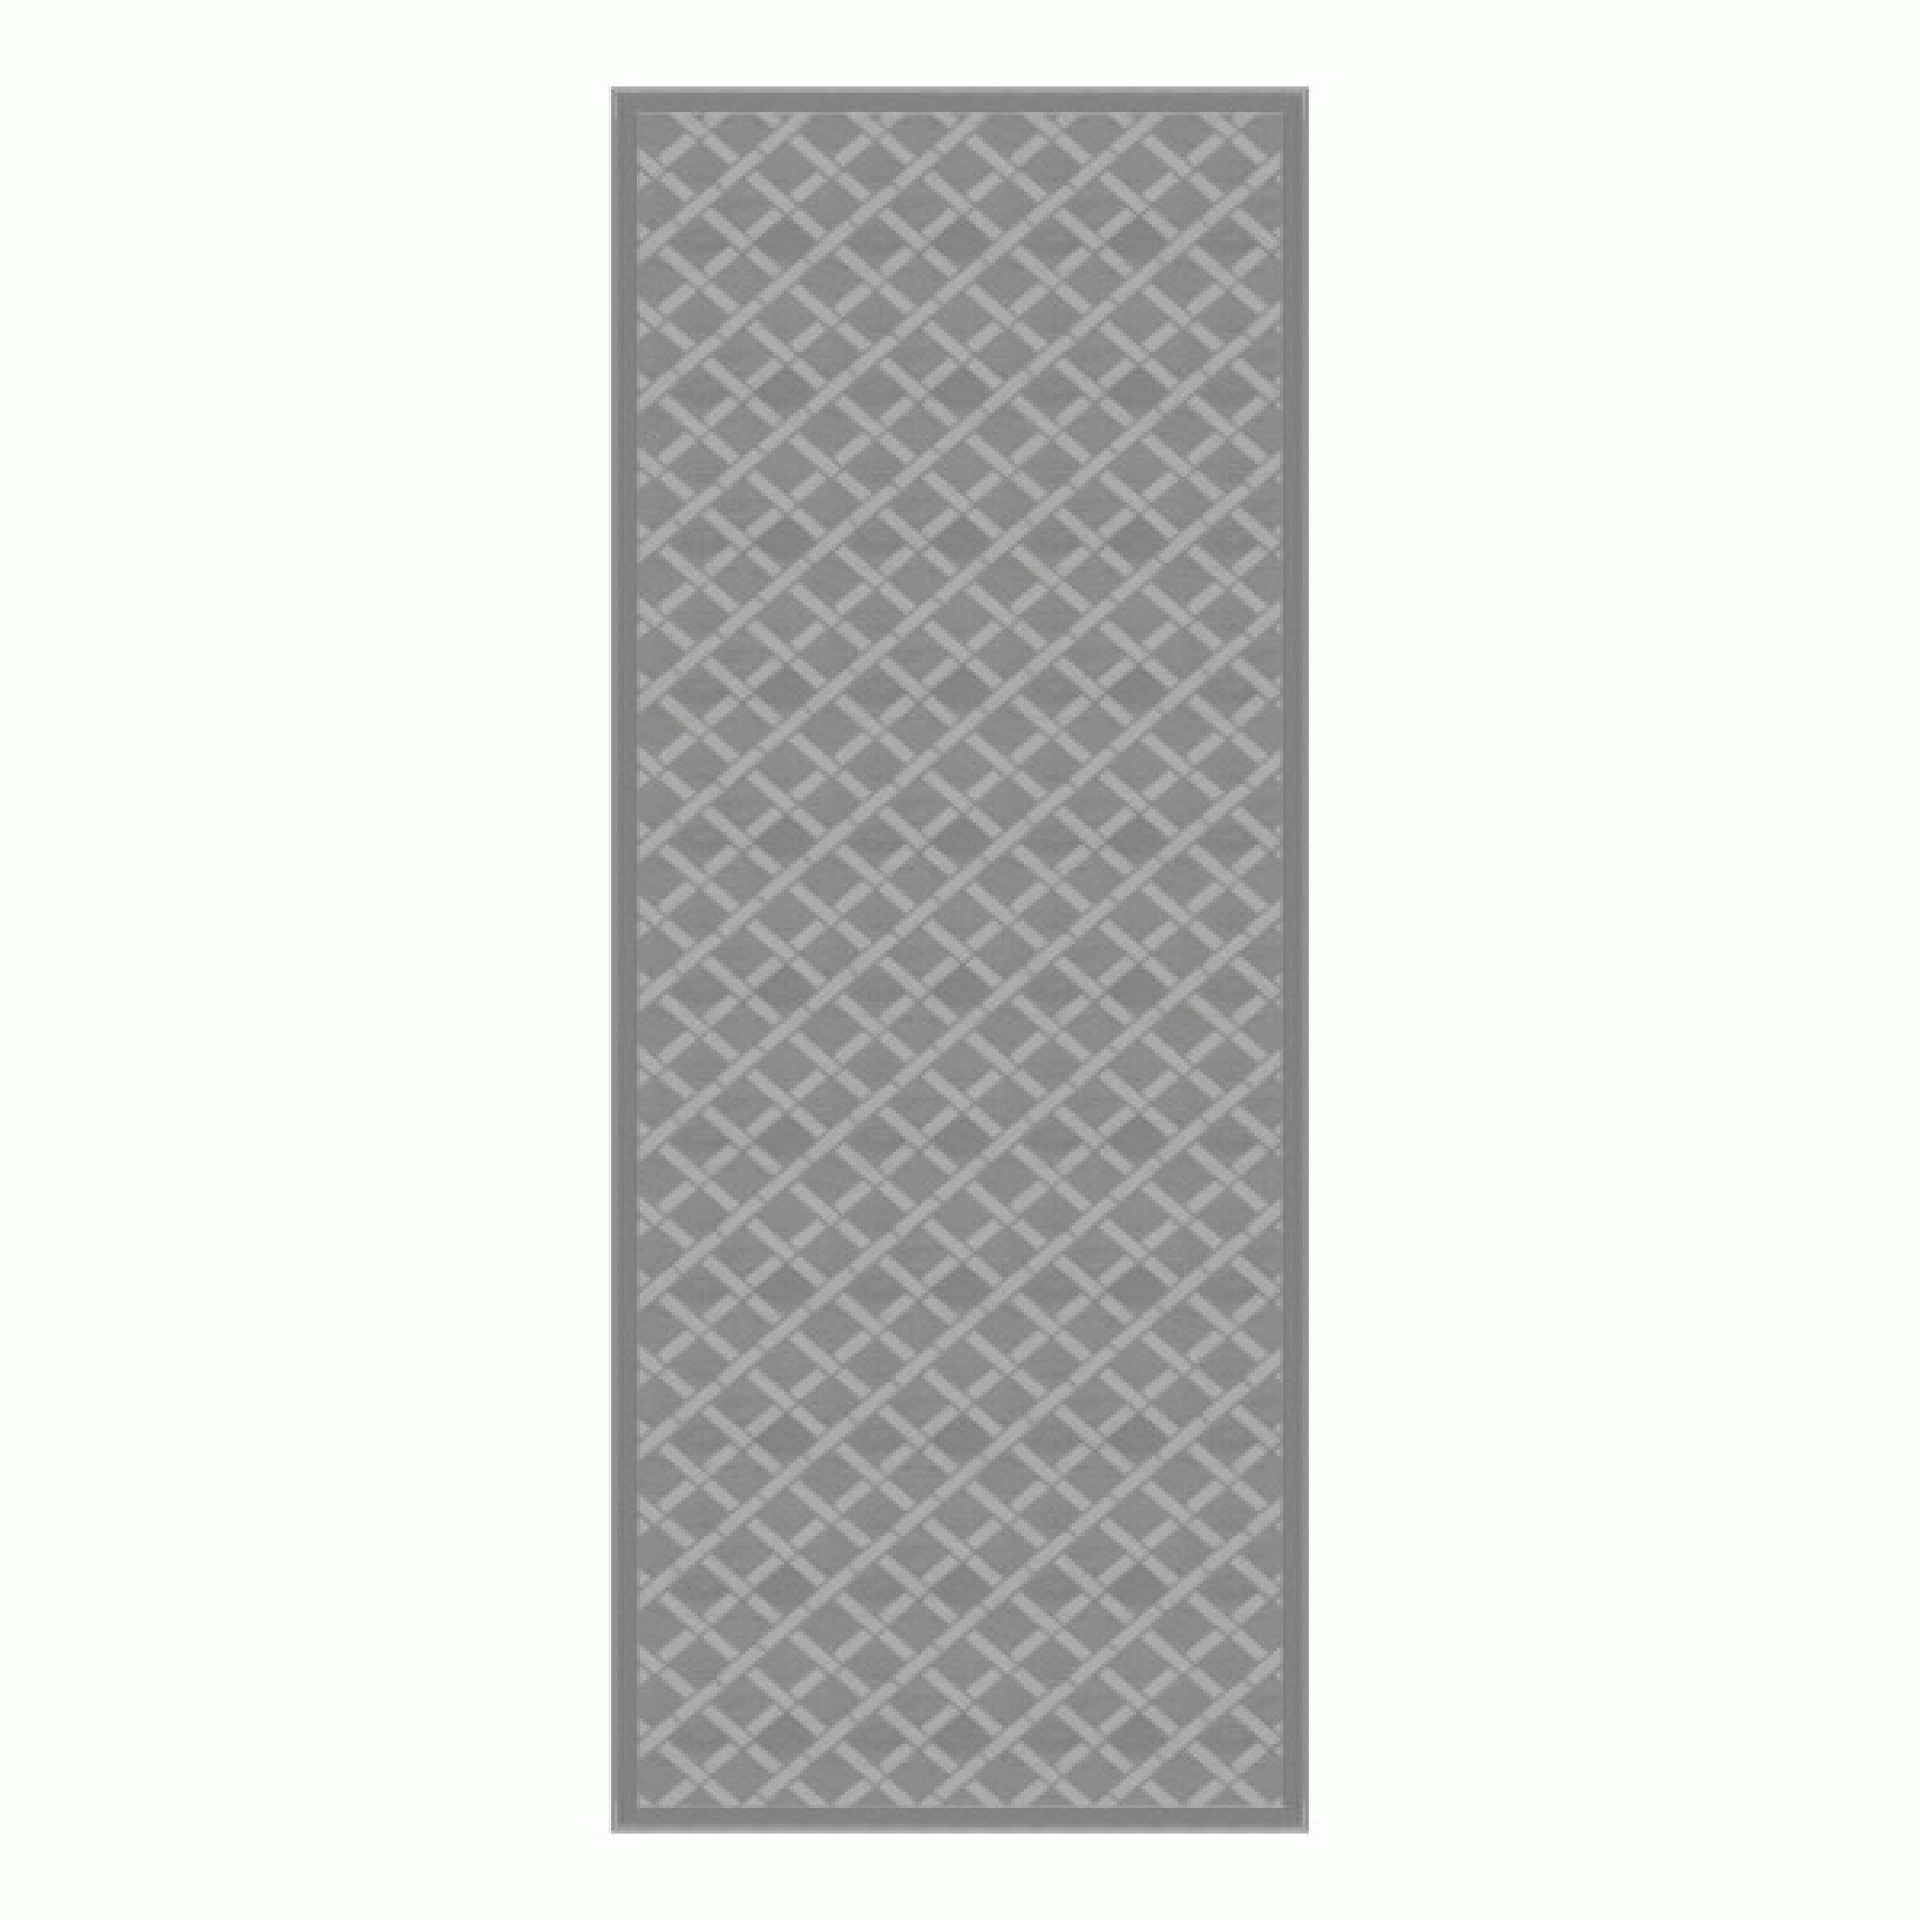 Lippert Components | 2021028038 | All Weather Patio Mat - 8' x 20' (Gray)